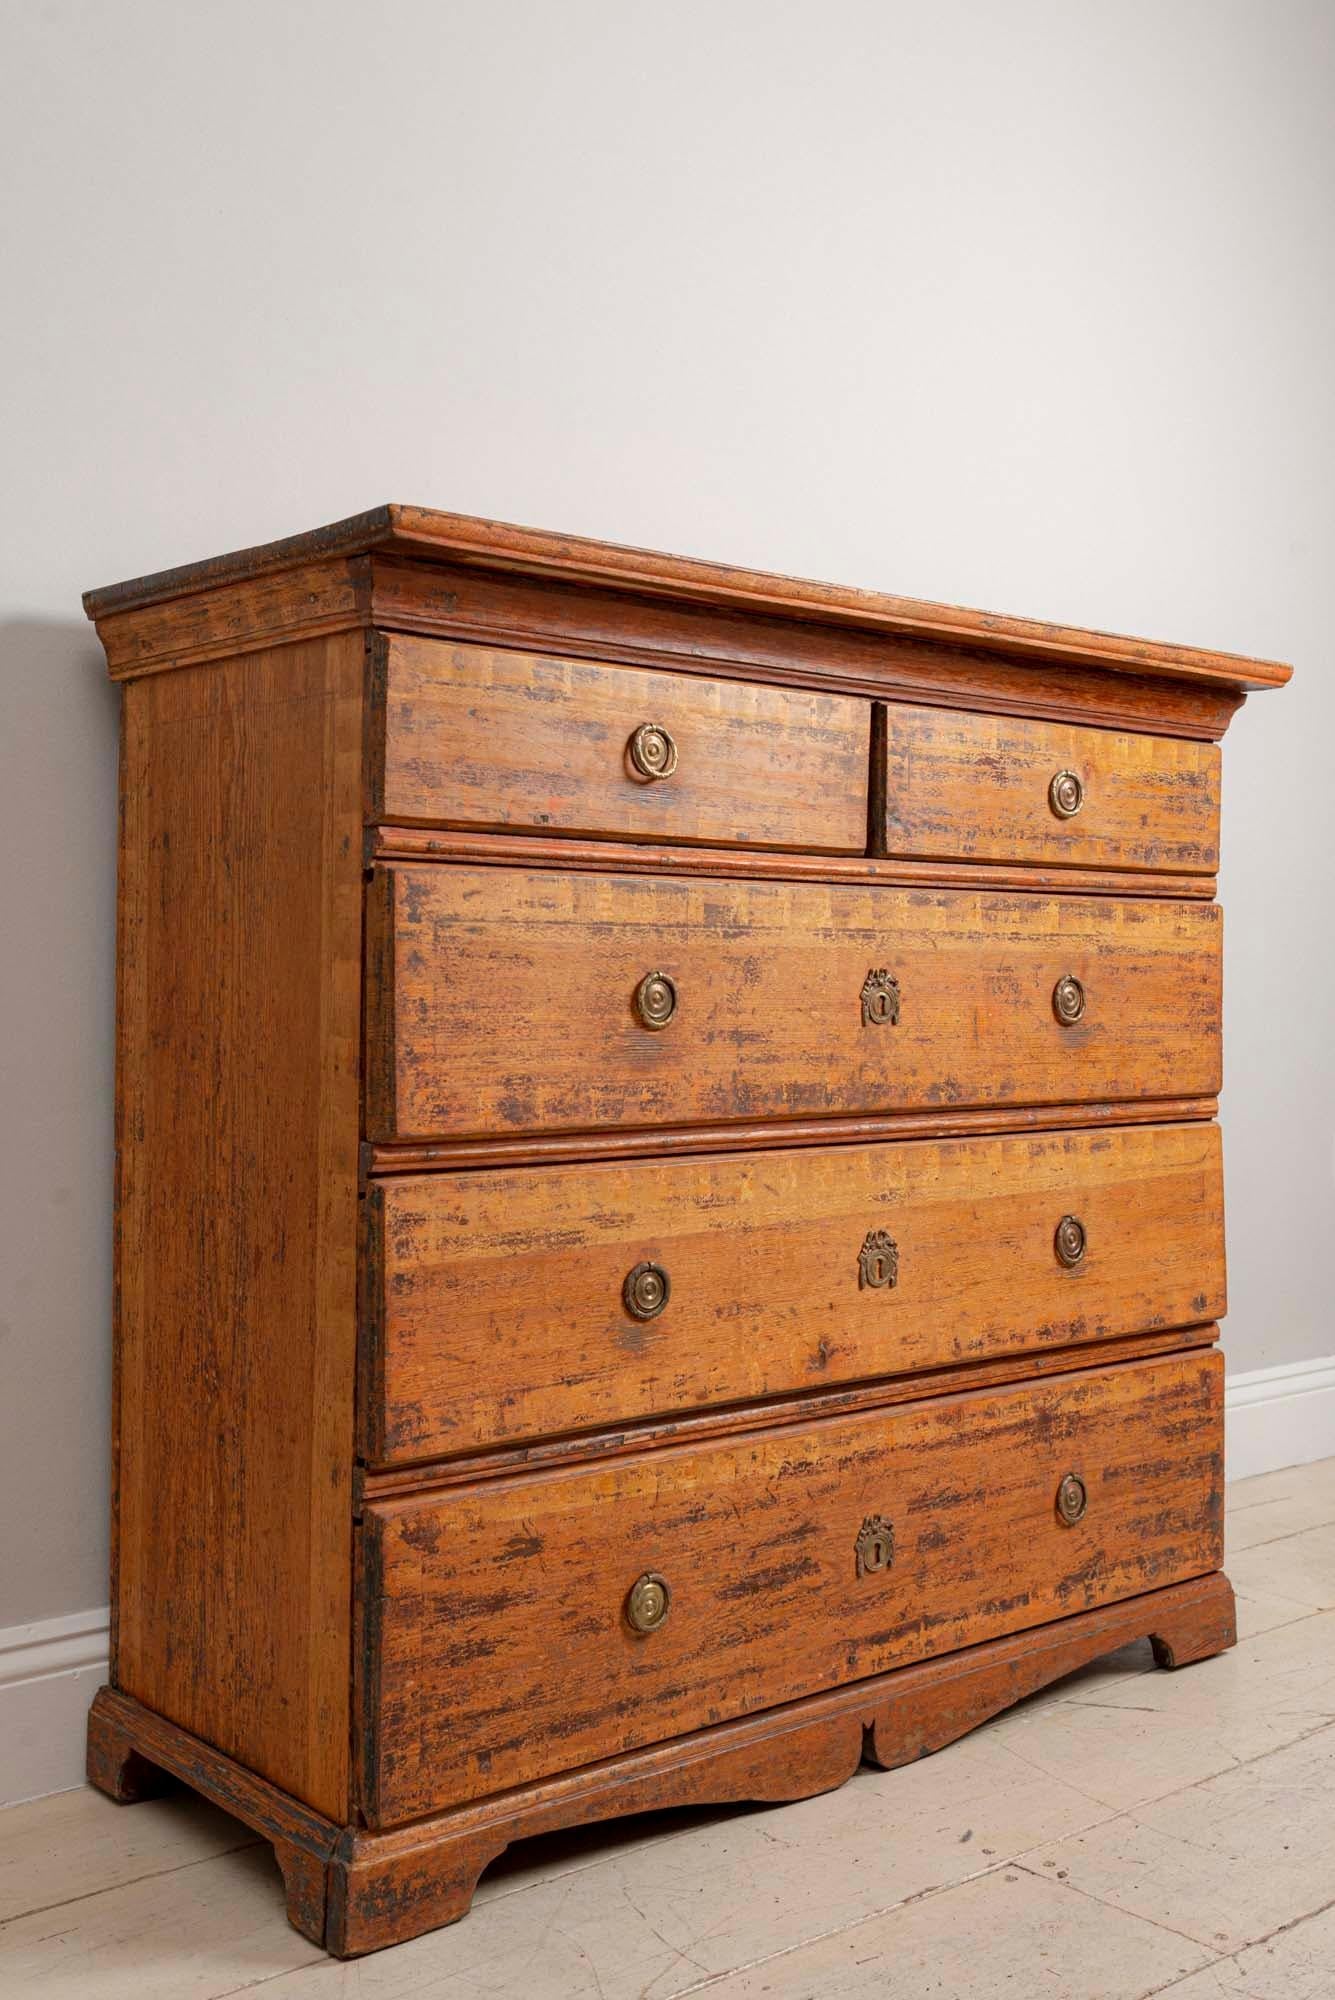 Swedish commode or chest of drawers known as a 'folk chest' which is from the northern region of Sweden, circa 18th century. A beautiful piece with a simple and understated design but full of character. It has its original hardware and also retains